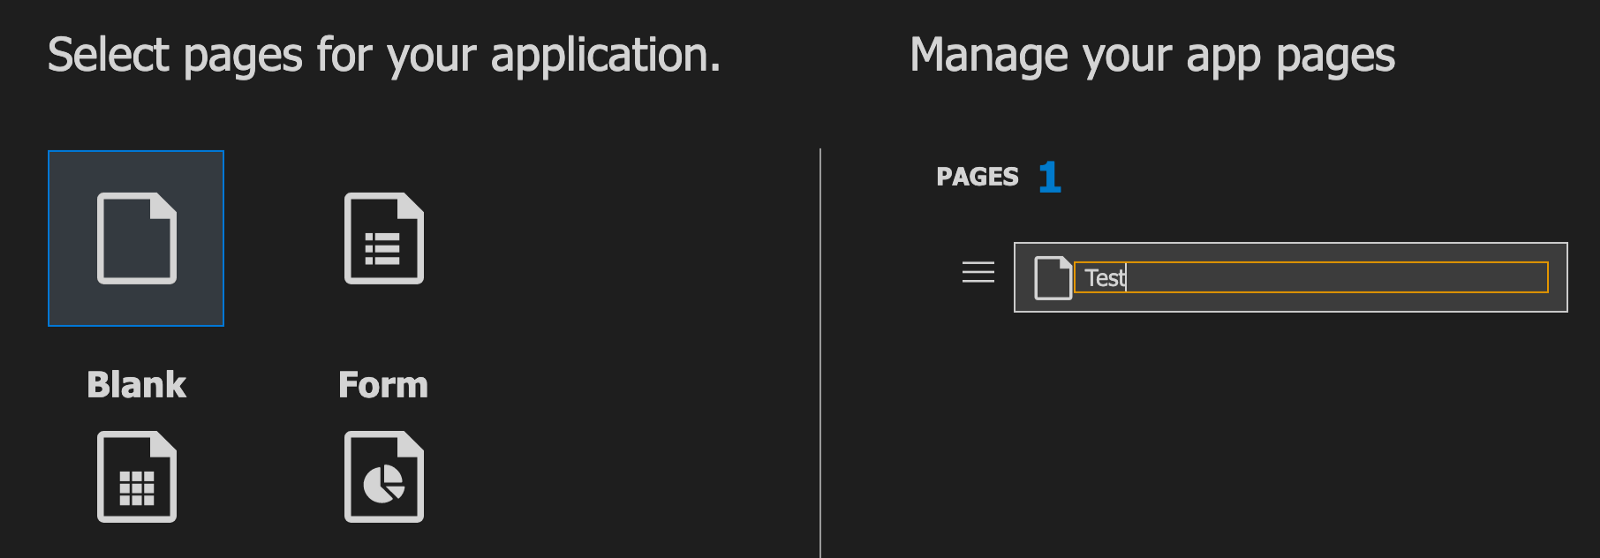 Select pages for your application. We have chosen blank. Then Manage your app pages. We have 1 page, labeled Test.